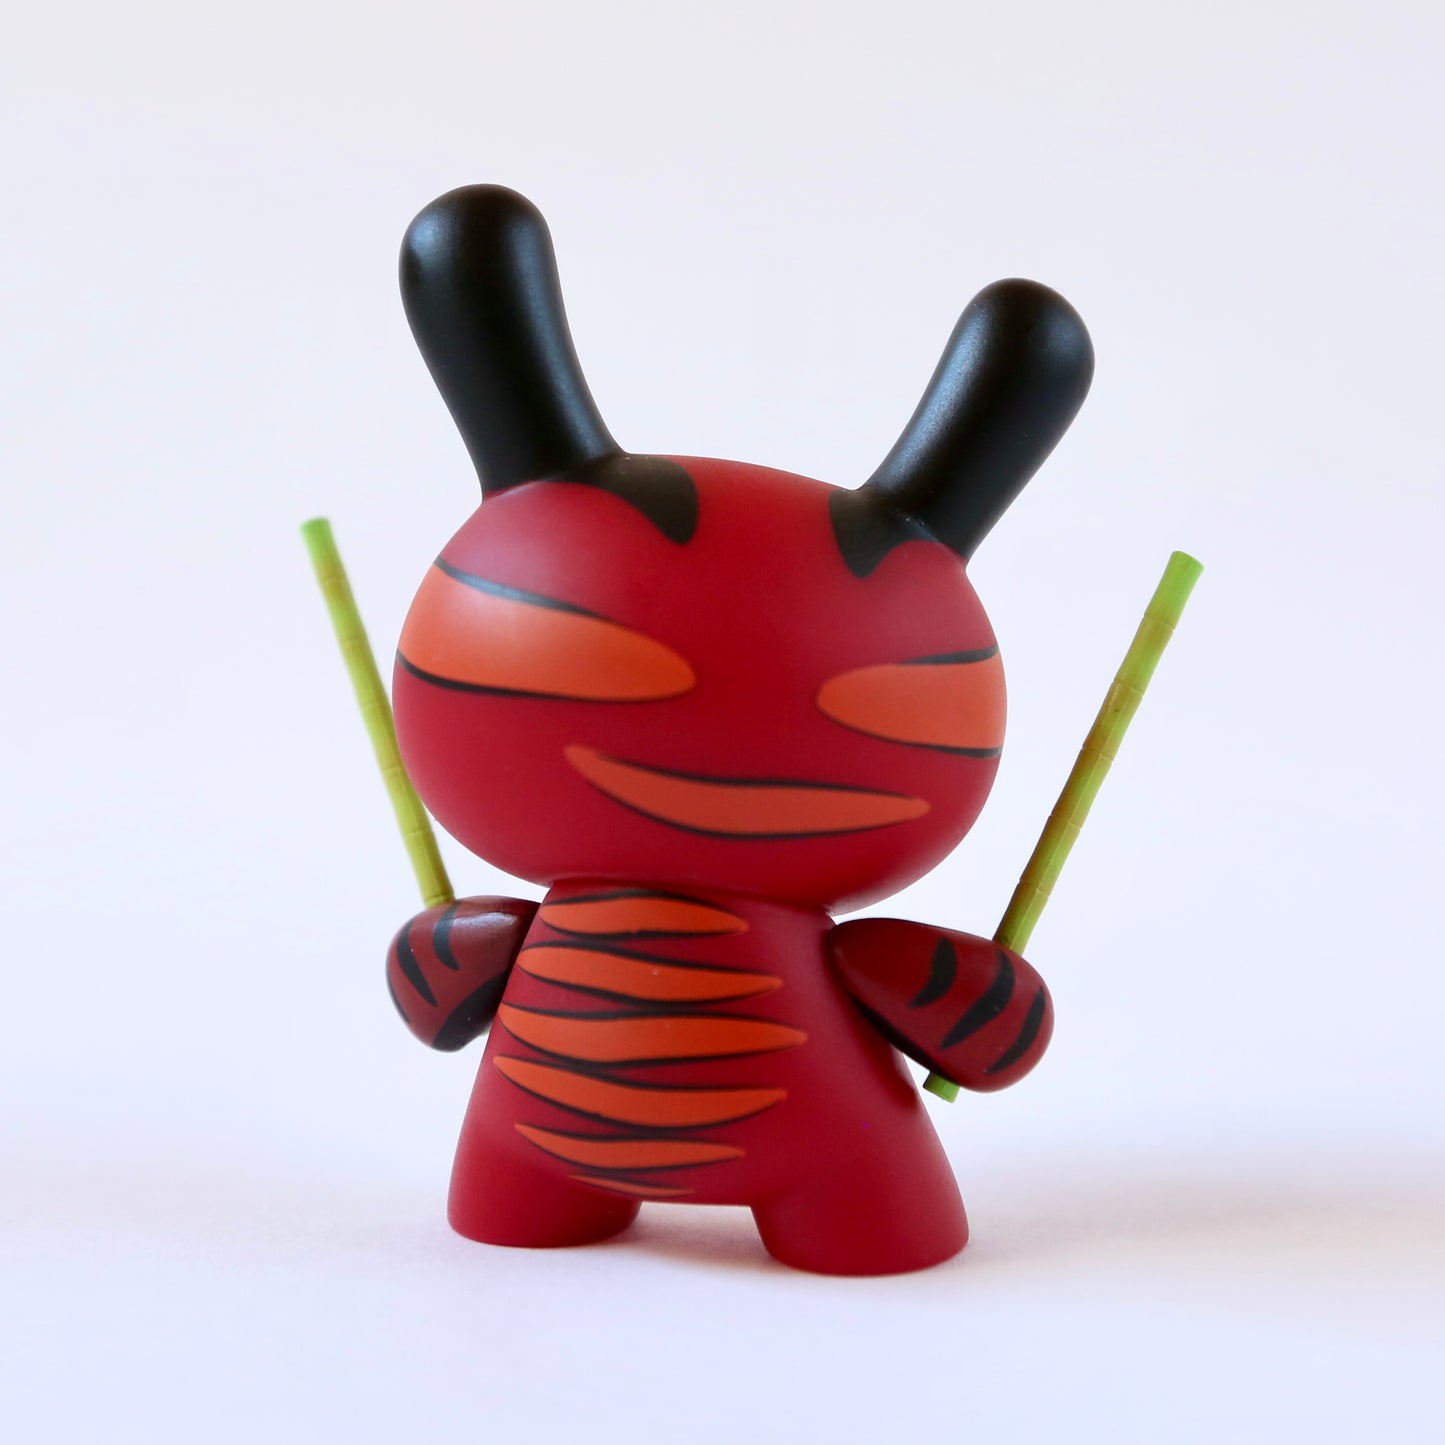 "Red Panda" (1/20) 3in Dunny by Shane Jessup x Kidrobot